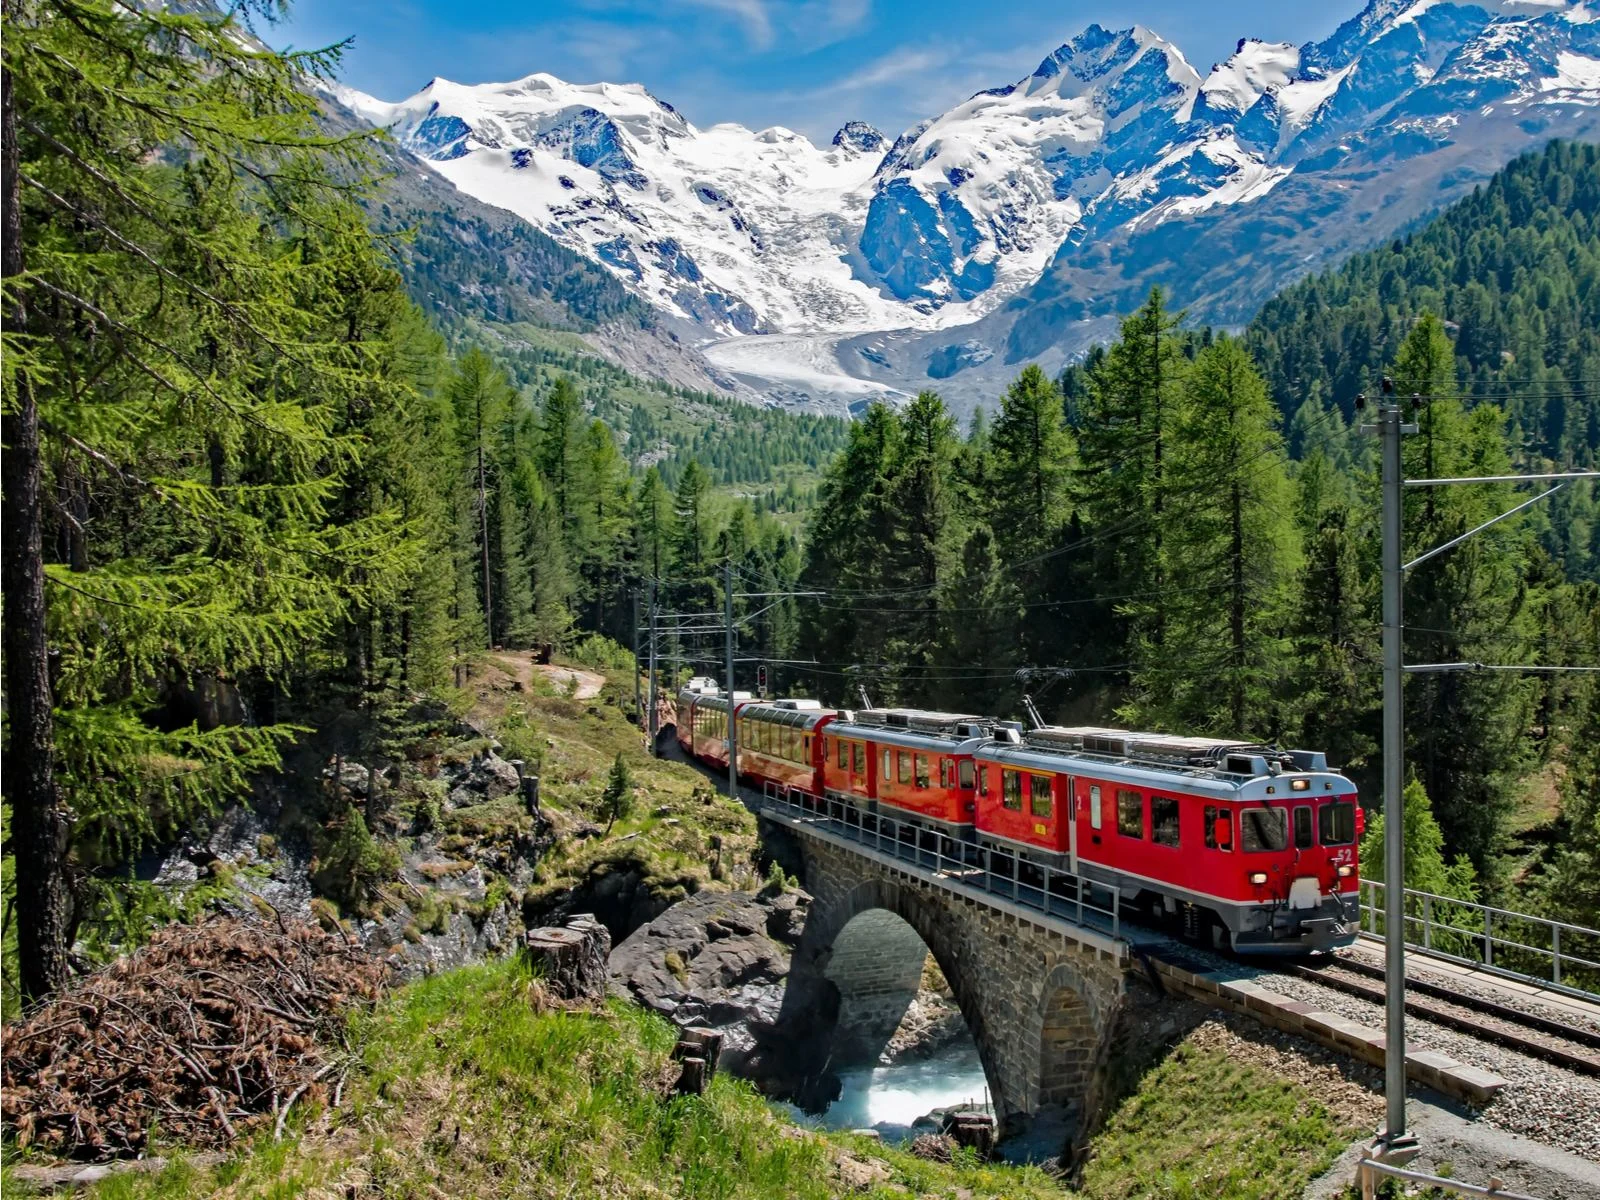 The Bernina Express pictured during the best time to visit Europe with the gorgeous Alps in the background of the forest